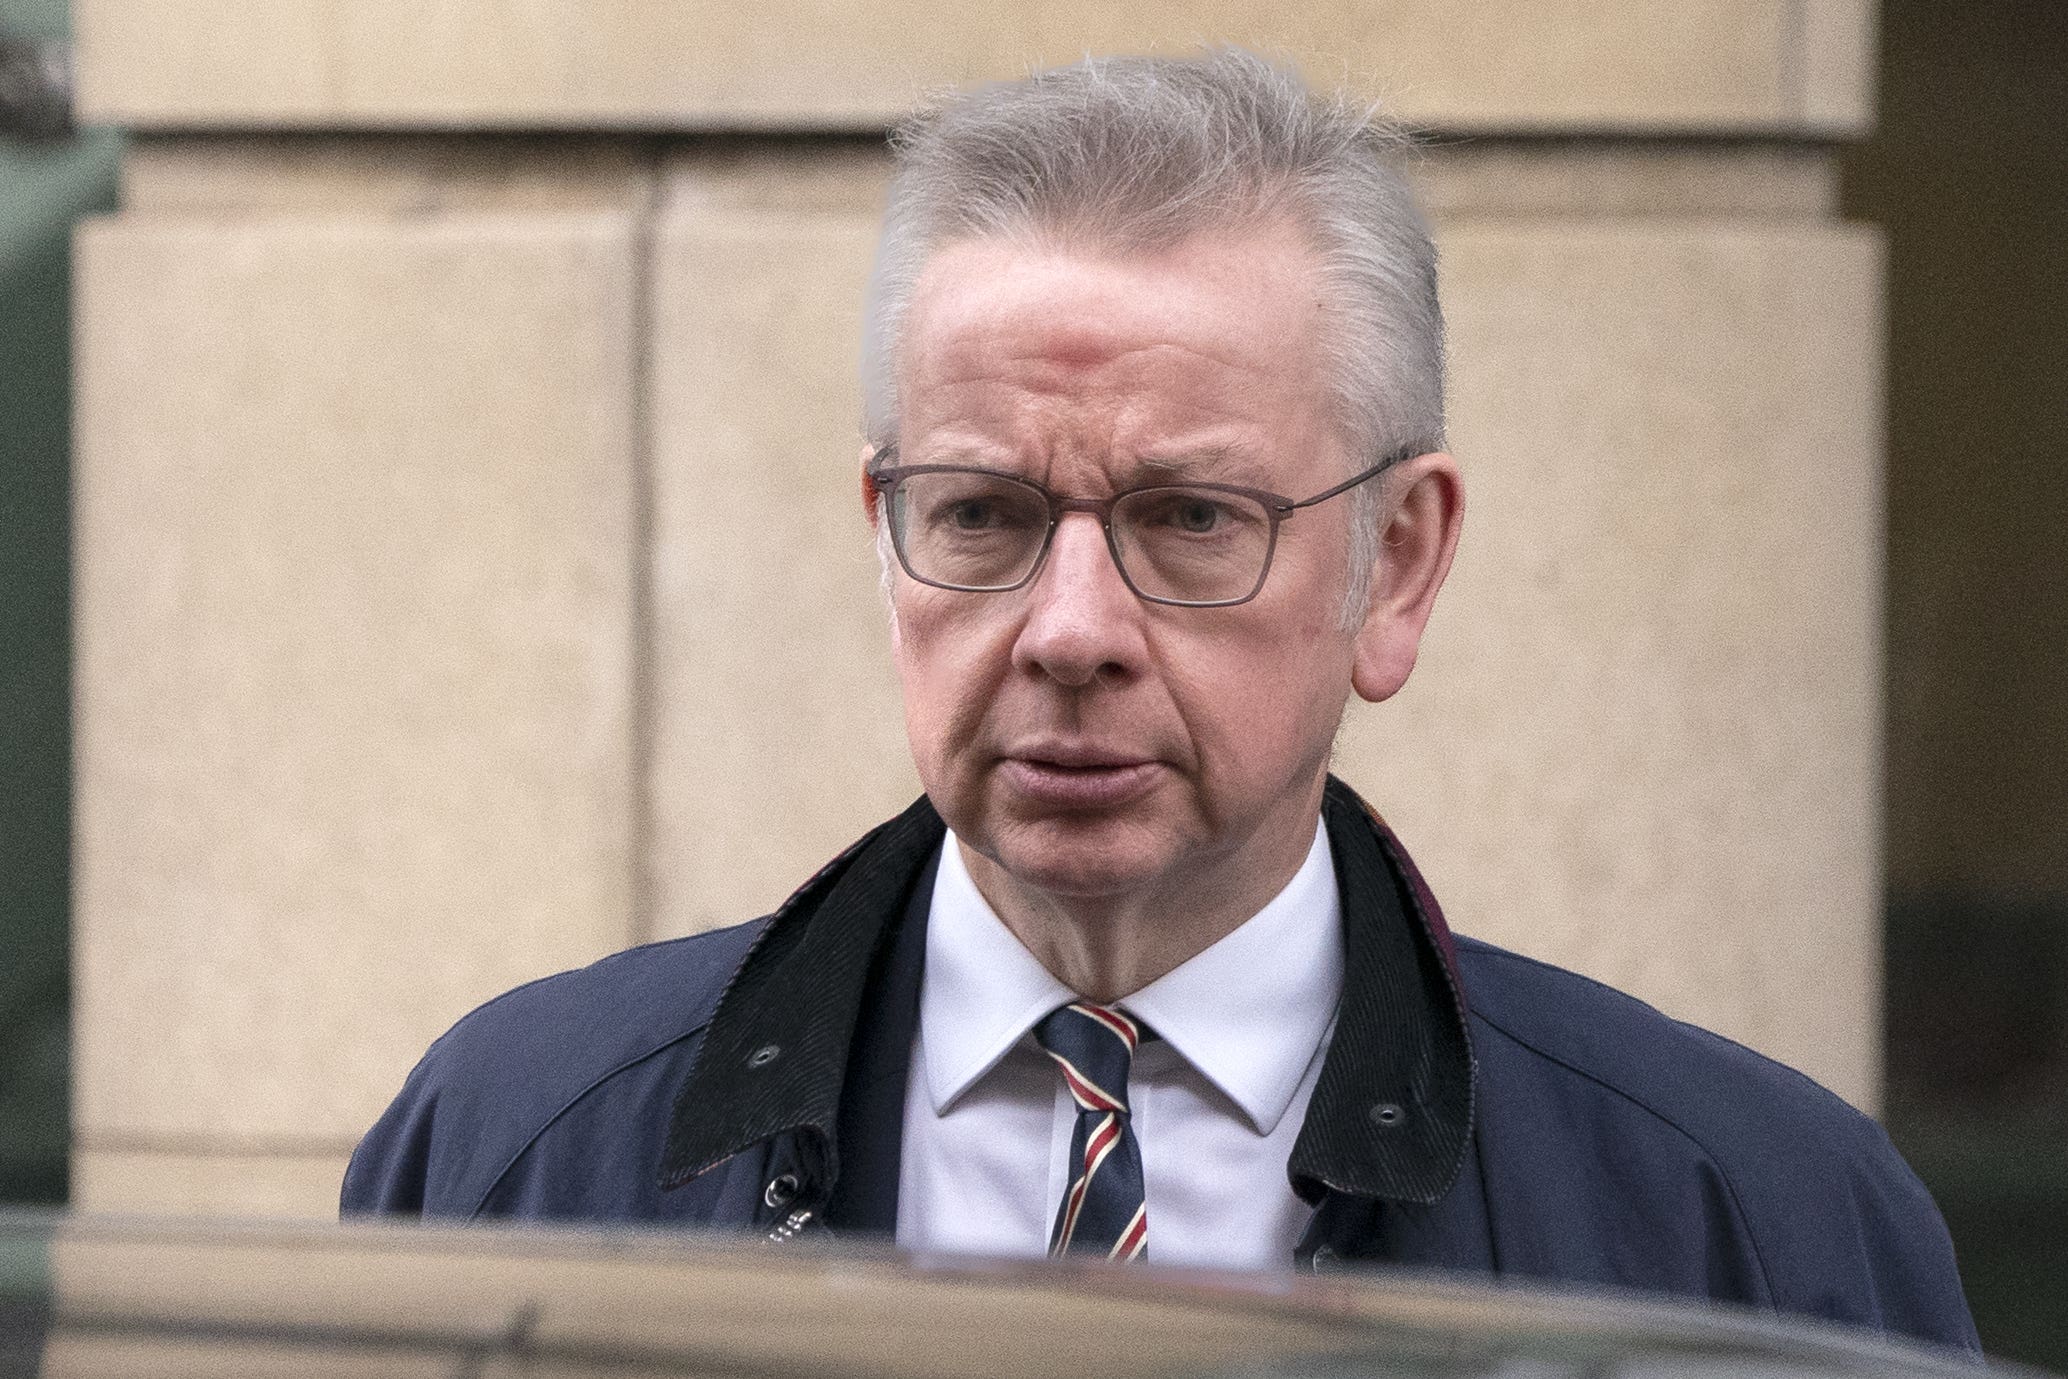 Levelling Up Secretary Michael Gove has been a long-standing ally of Kemi Badenoch and supported her leadership bid back in 2022